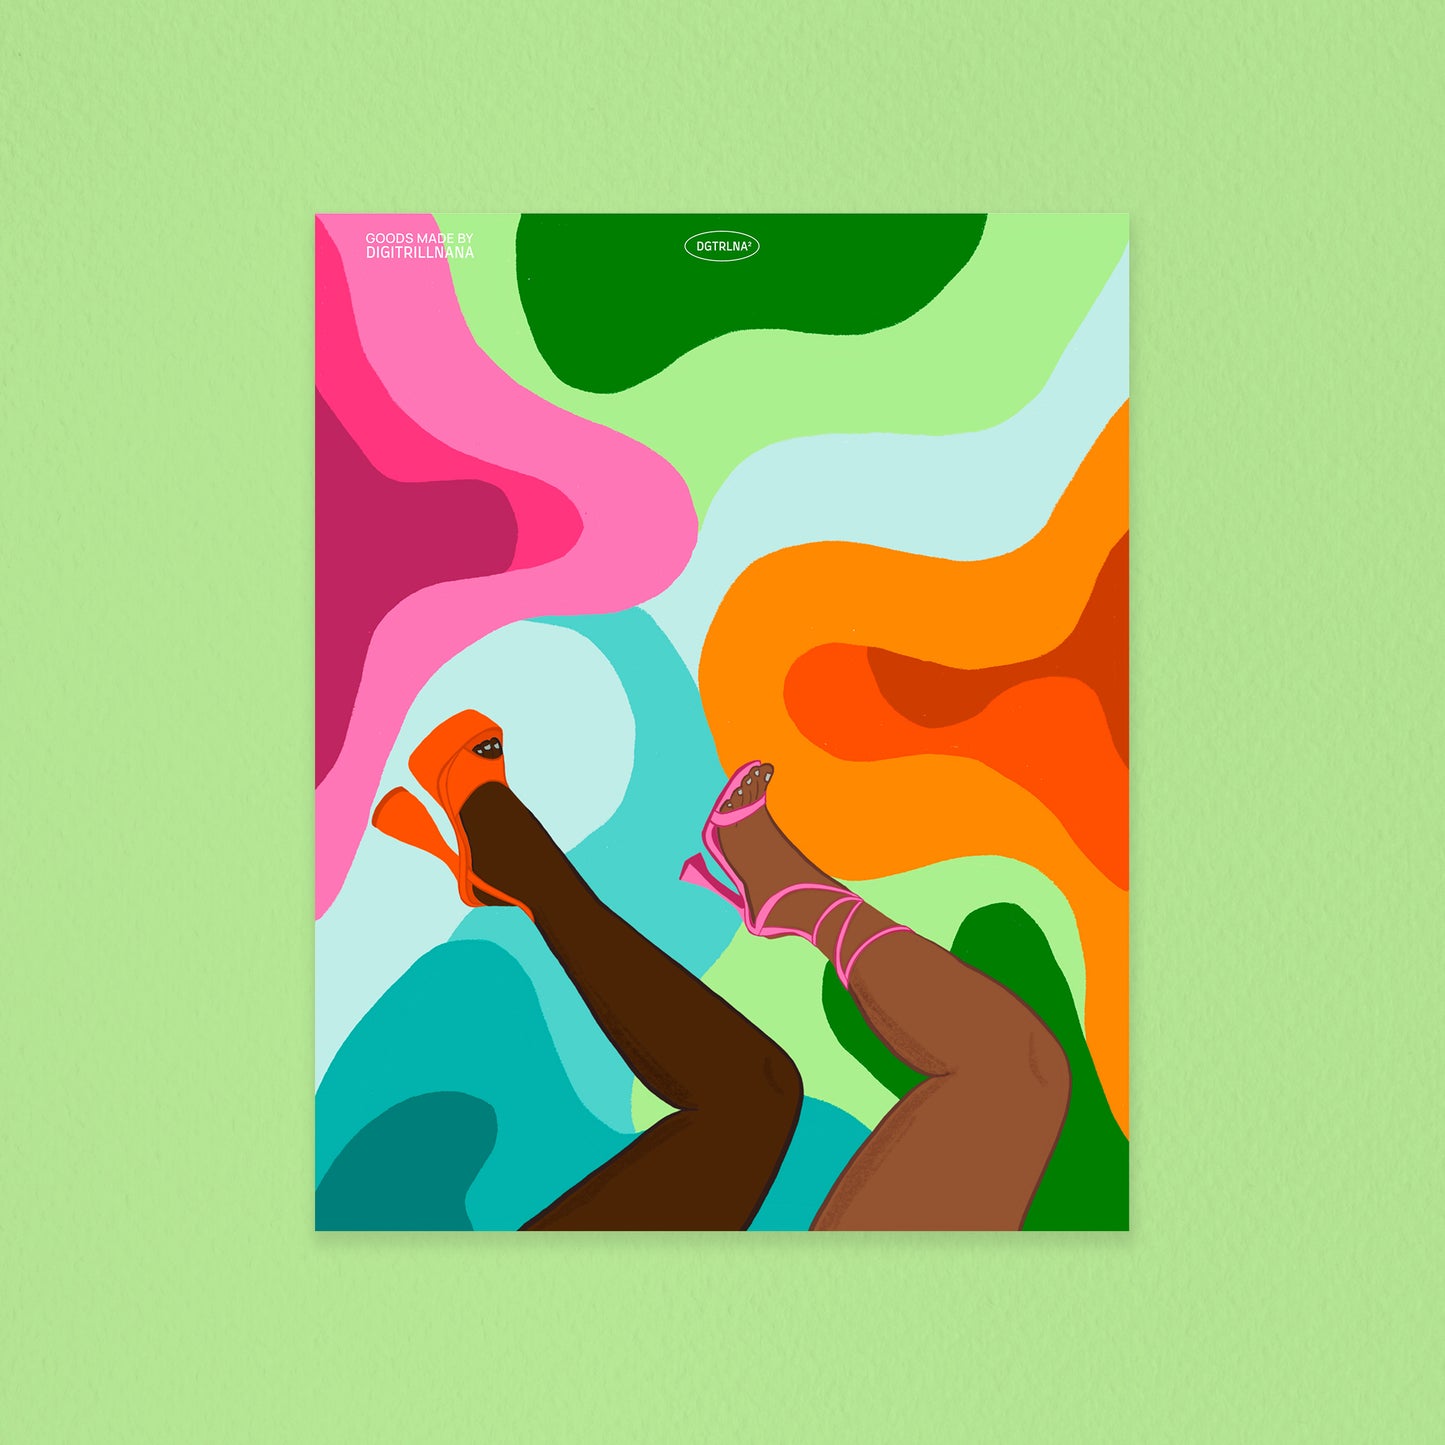 New Heights 8x10” art print from Goods Made By Digitrillnana, Ashley Fletcher. Modern, green, fashion poster, Black Woman art. Perfect for home decor, wall art, art prints, and more! Black Woman Owned.